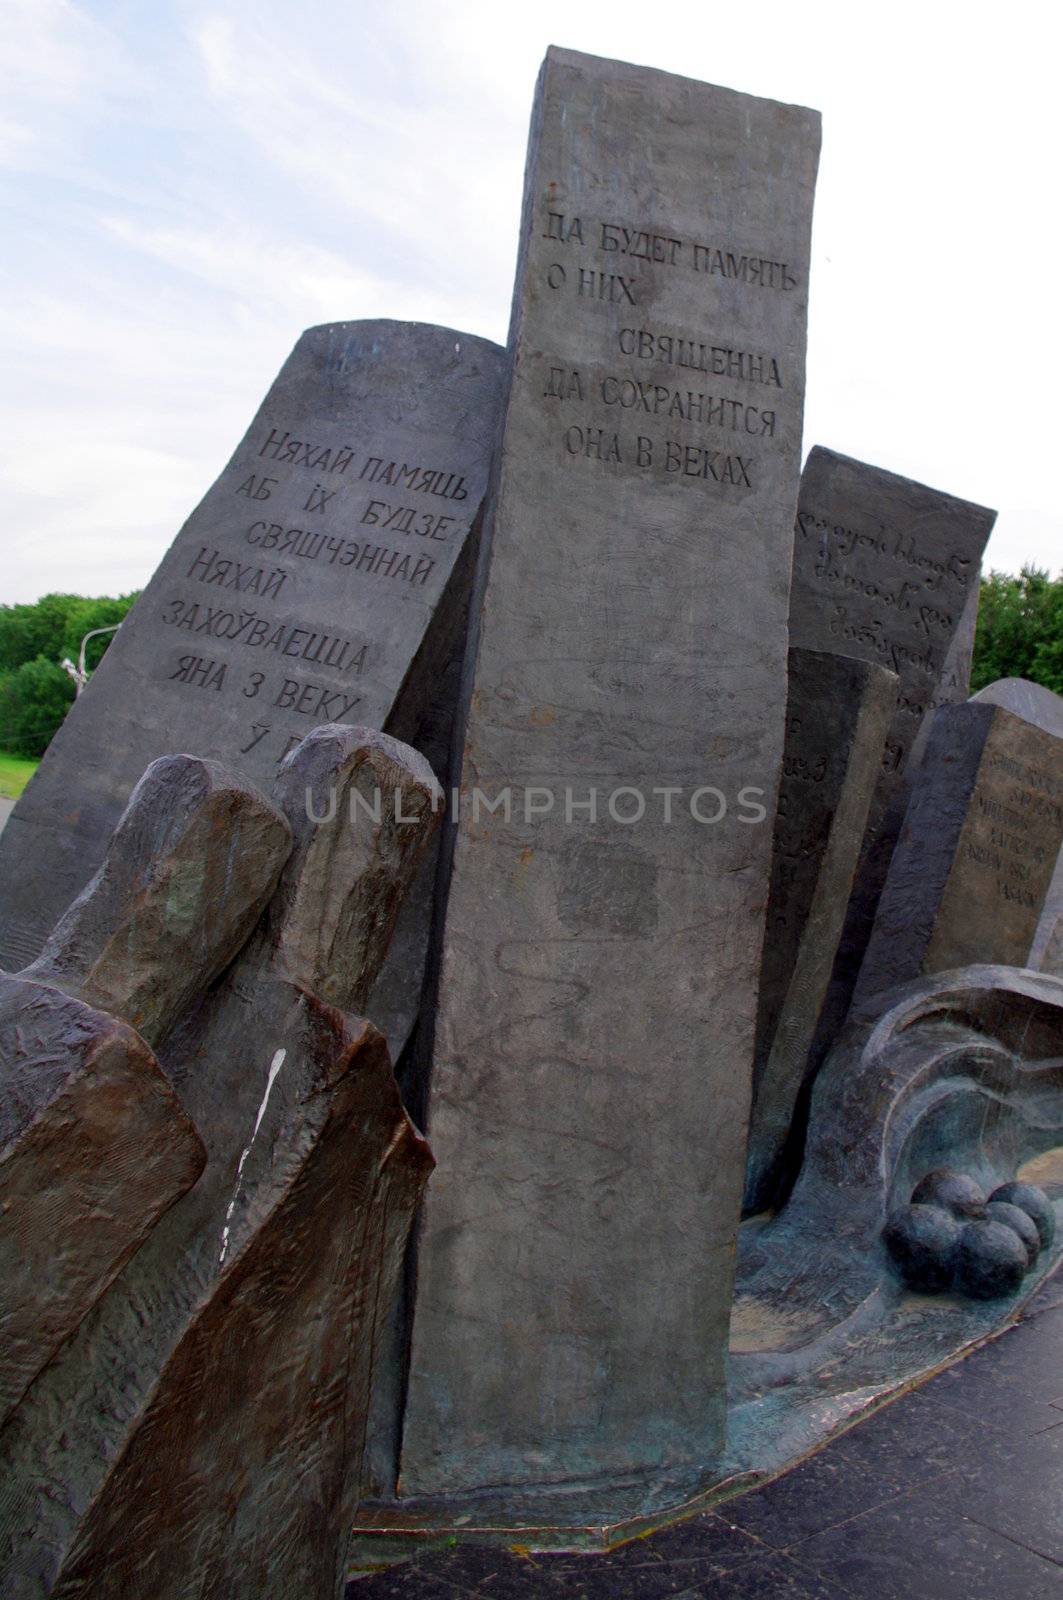 Monument tragedy of nations in Victory park, Moscow, Russia by Stoyanov